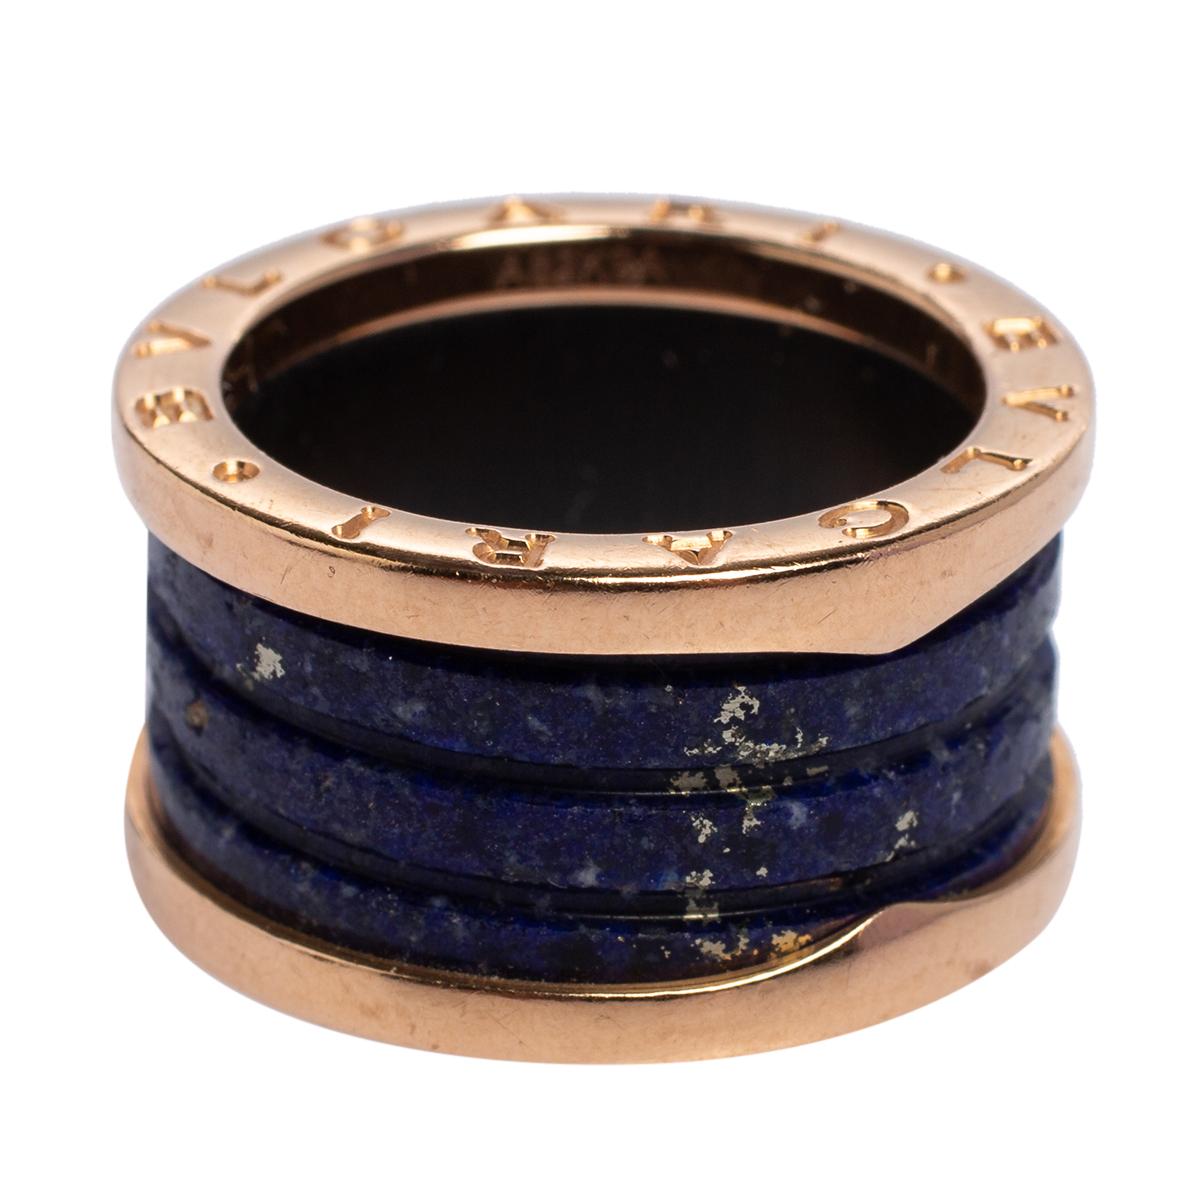 For the woman who has a refined taste in fine jewelry, Bvlgari brings her this immaculately crafted ring. Sculpted from 18k rose gold, this Bvlgari B.Zero1 ring features lapis lazuli bands stacked together. It is complete with signature engravings.

